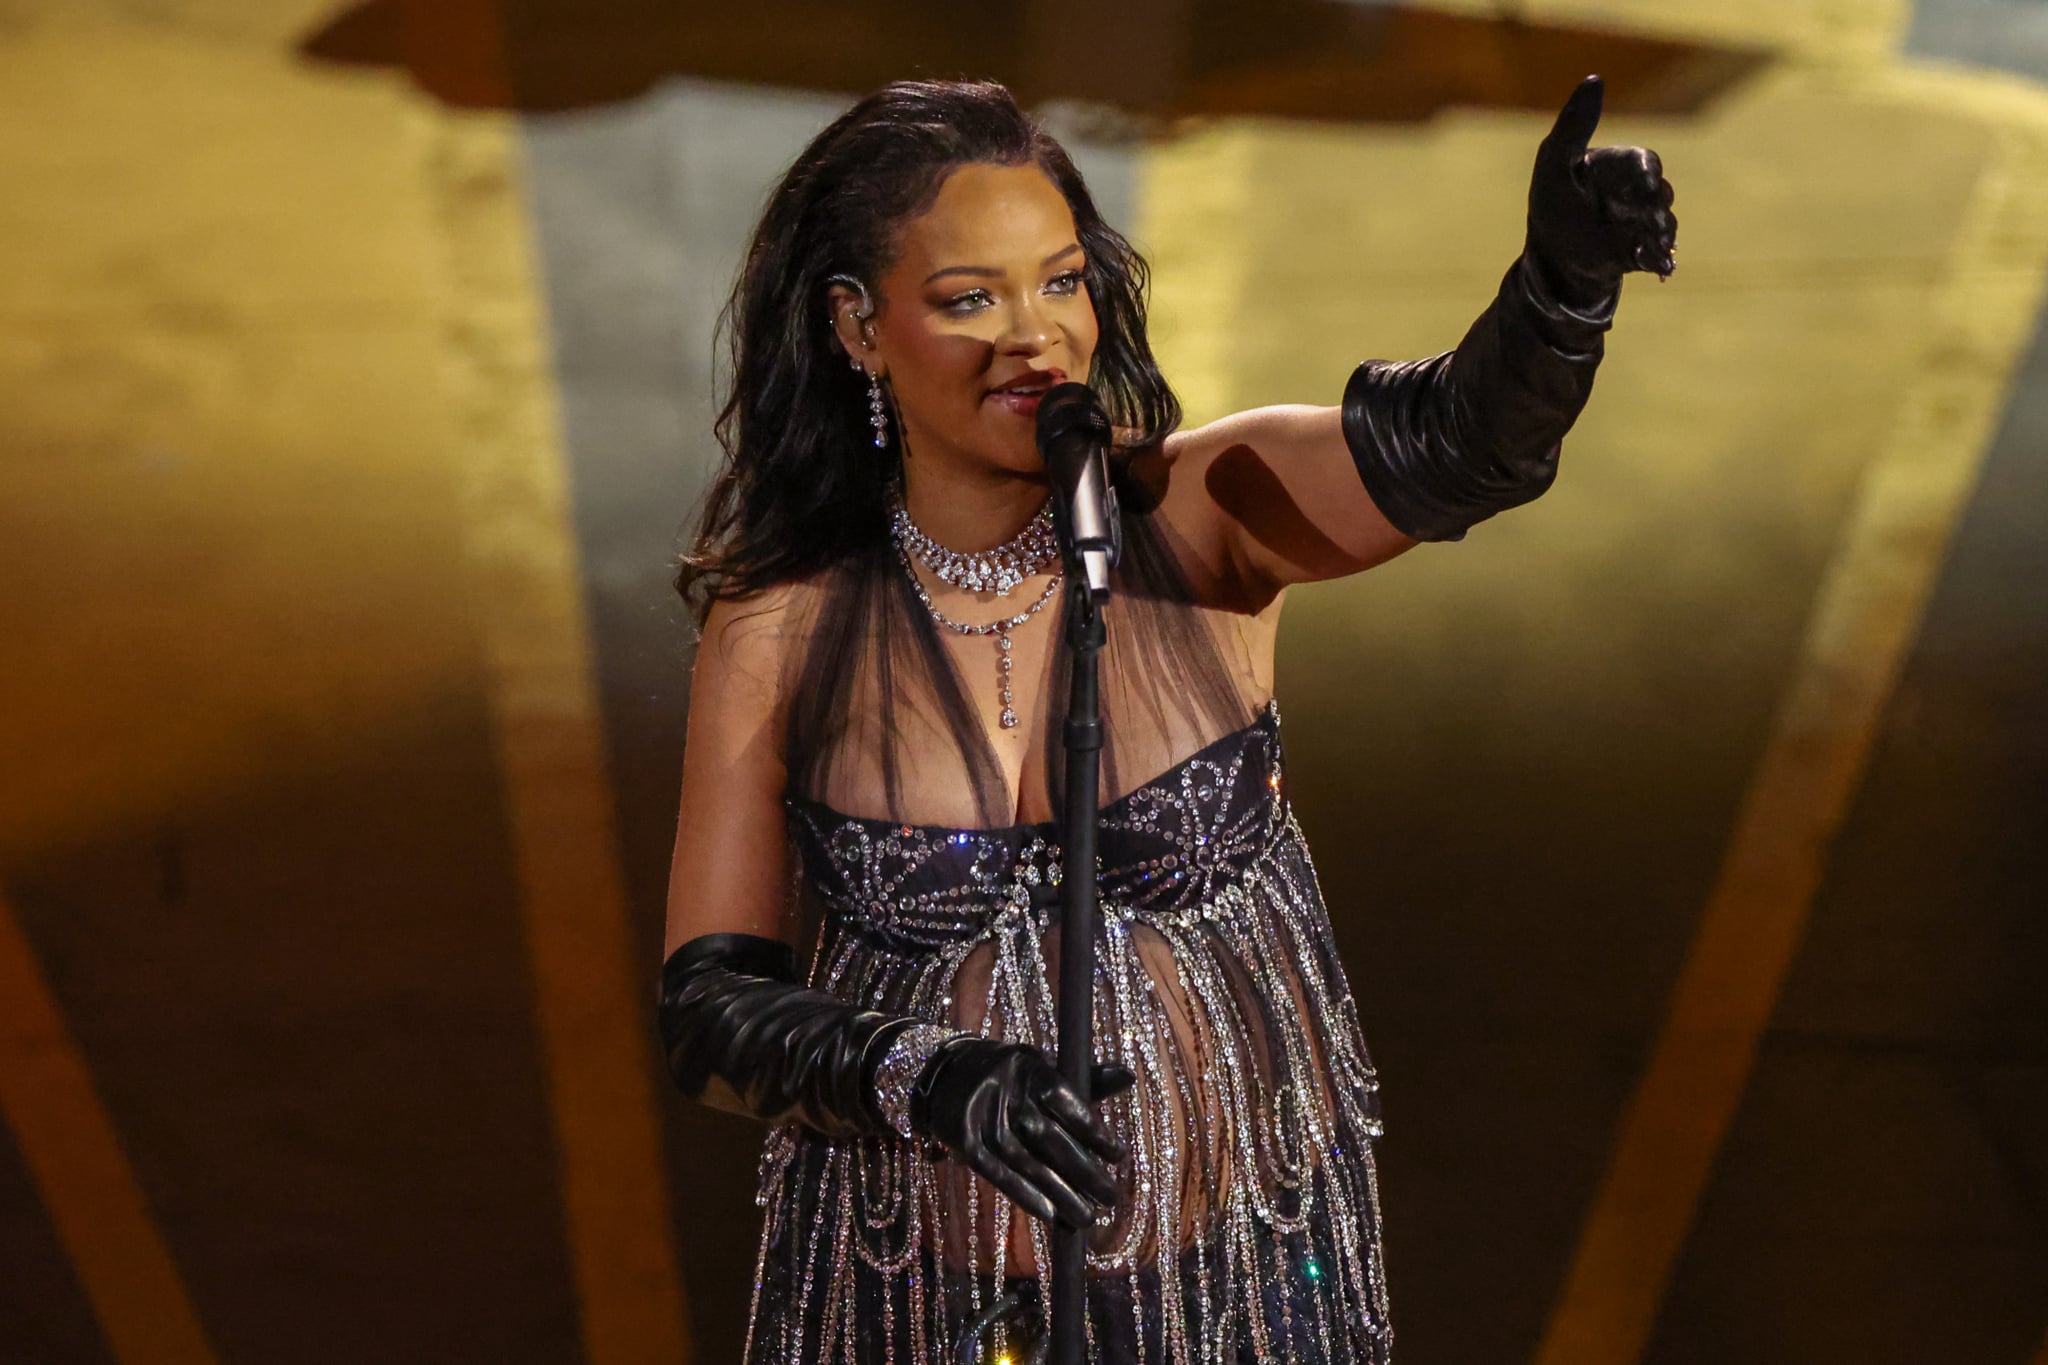 HOLLYWOOD, CA - MARCH 12: Rihanna performs at the 95th Academy Awards in the Dolby Theatre on March 12, 2023 in Hollywood, California. (Myung J. Chun / Los Angeles Times via Getty Images)